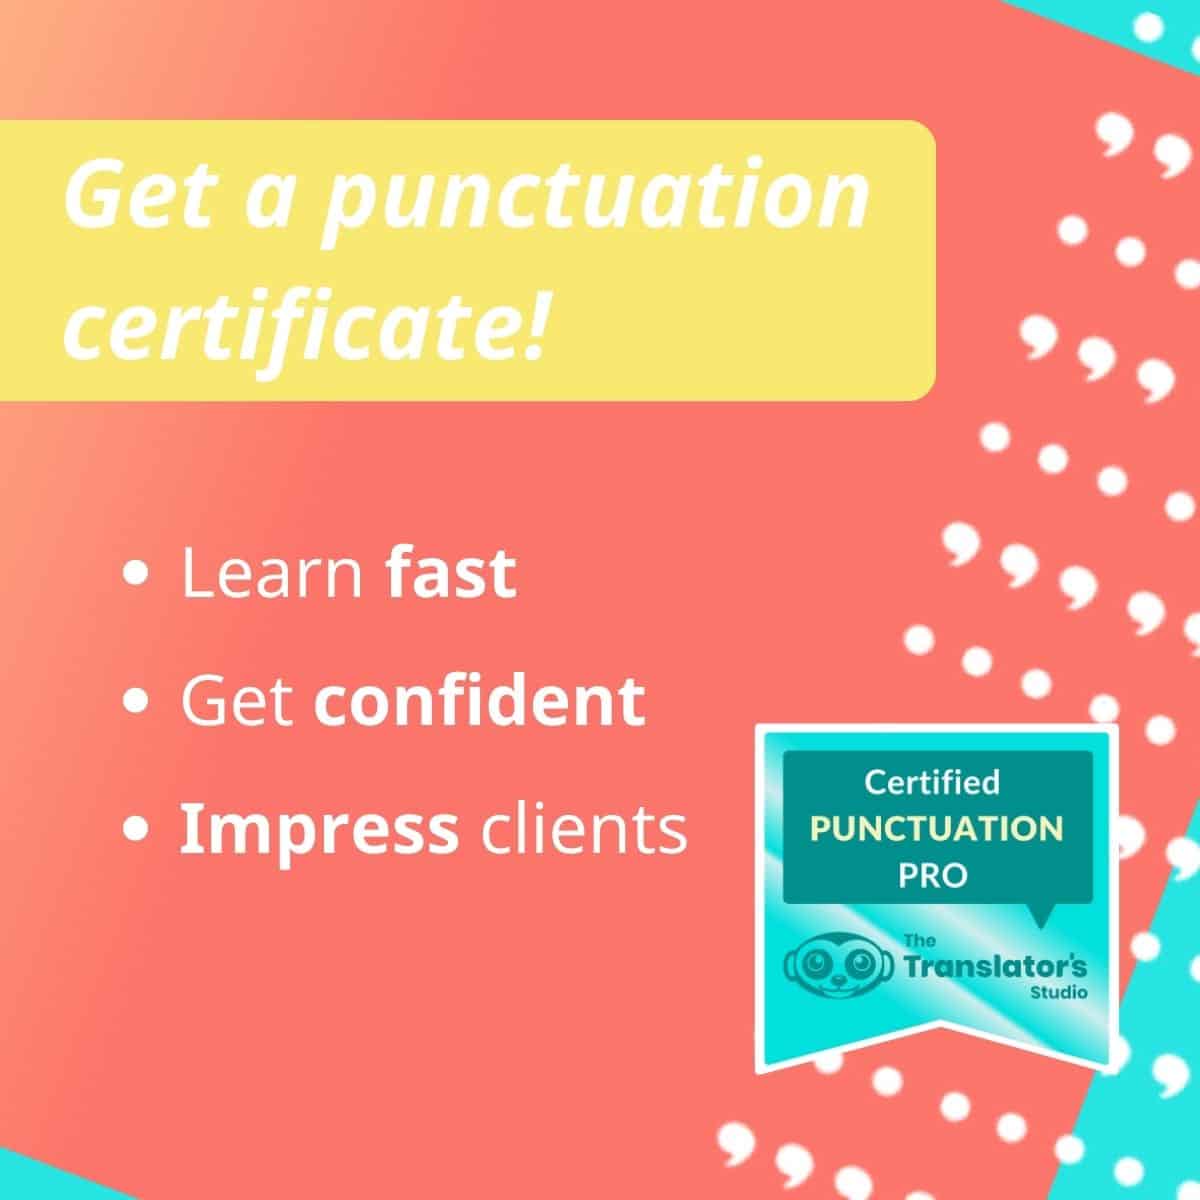 Get a punctuation certificate with Punctuation Pro course advertisement